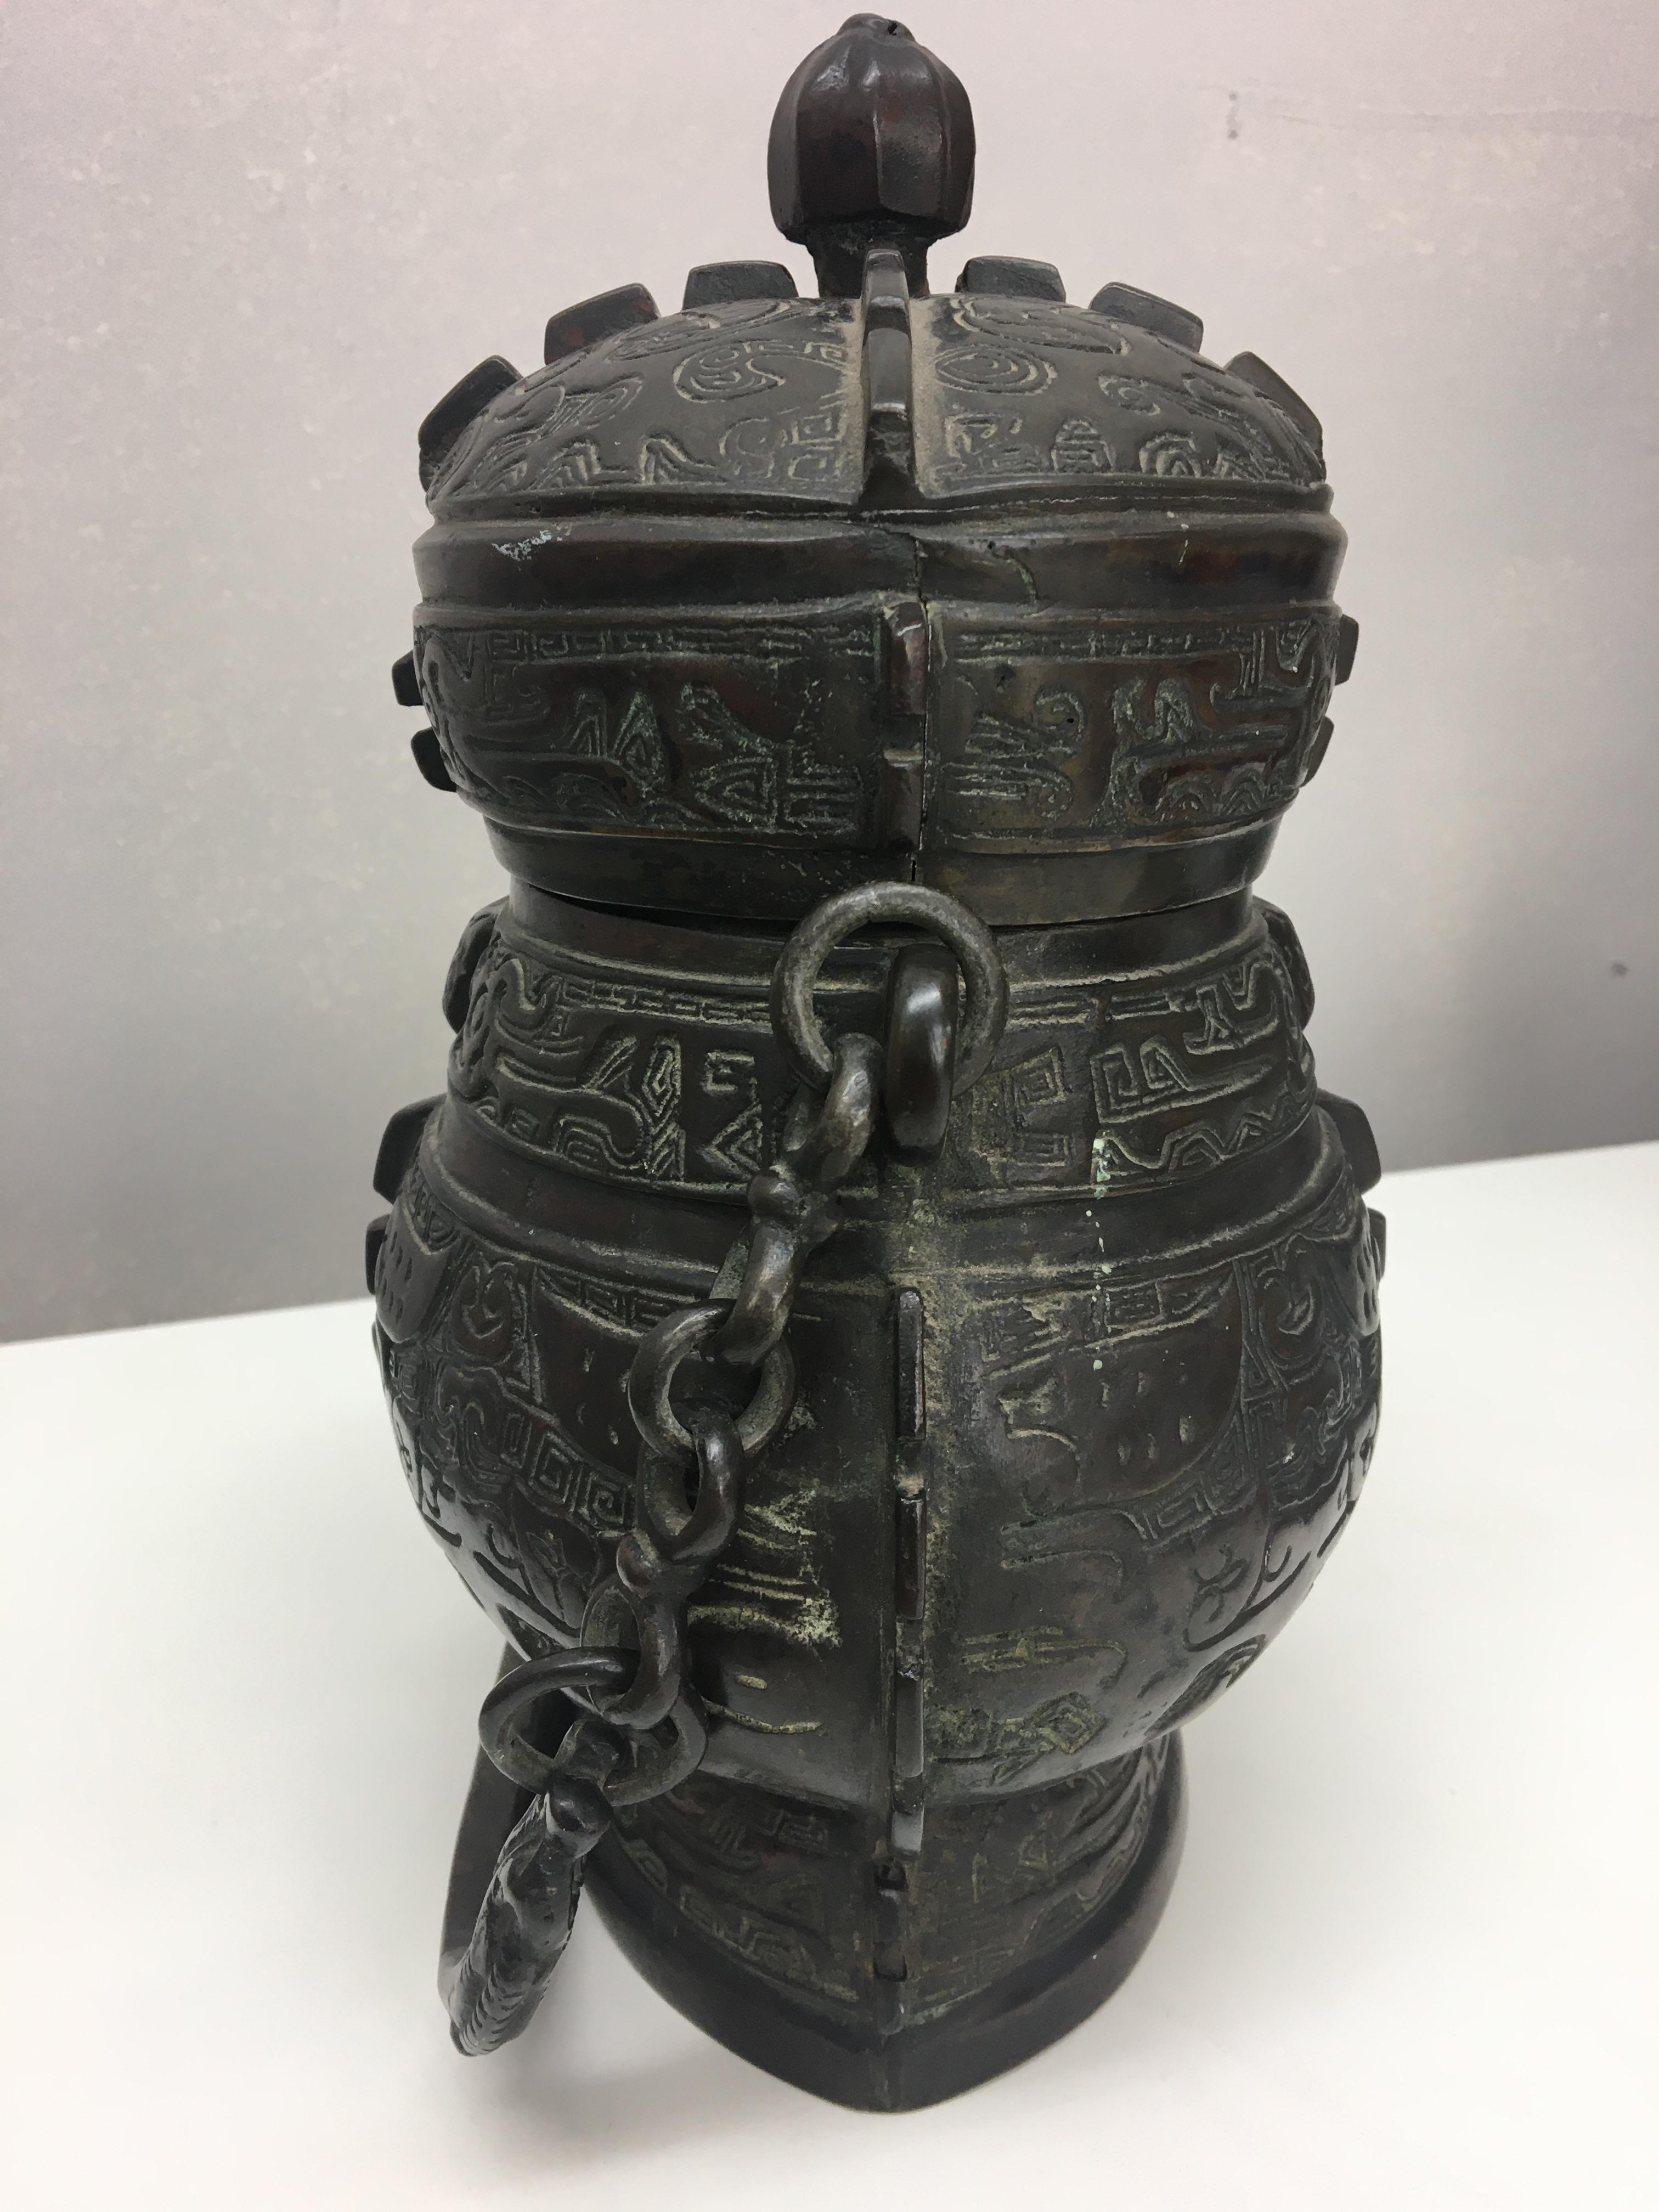 Archaic Bronze Qing Dynasty ceremonial wine vessel - Image 8 of 9